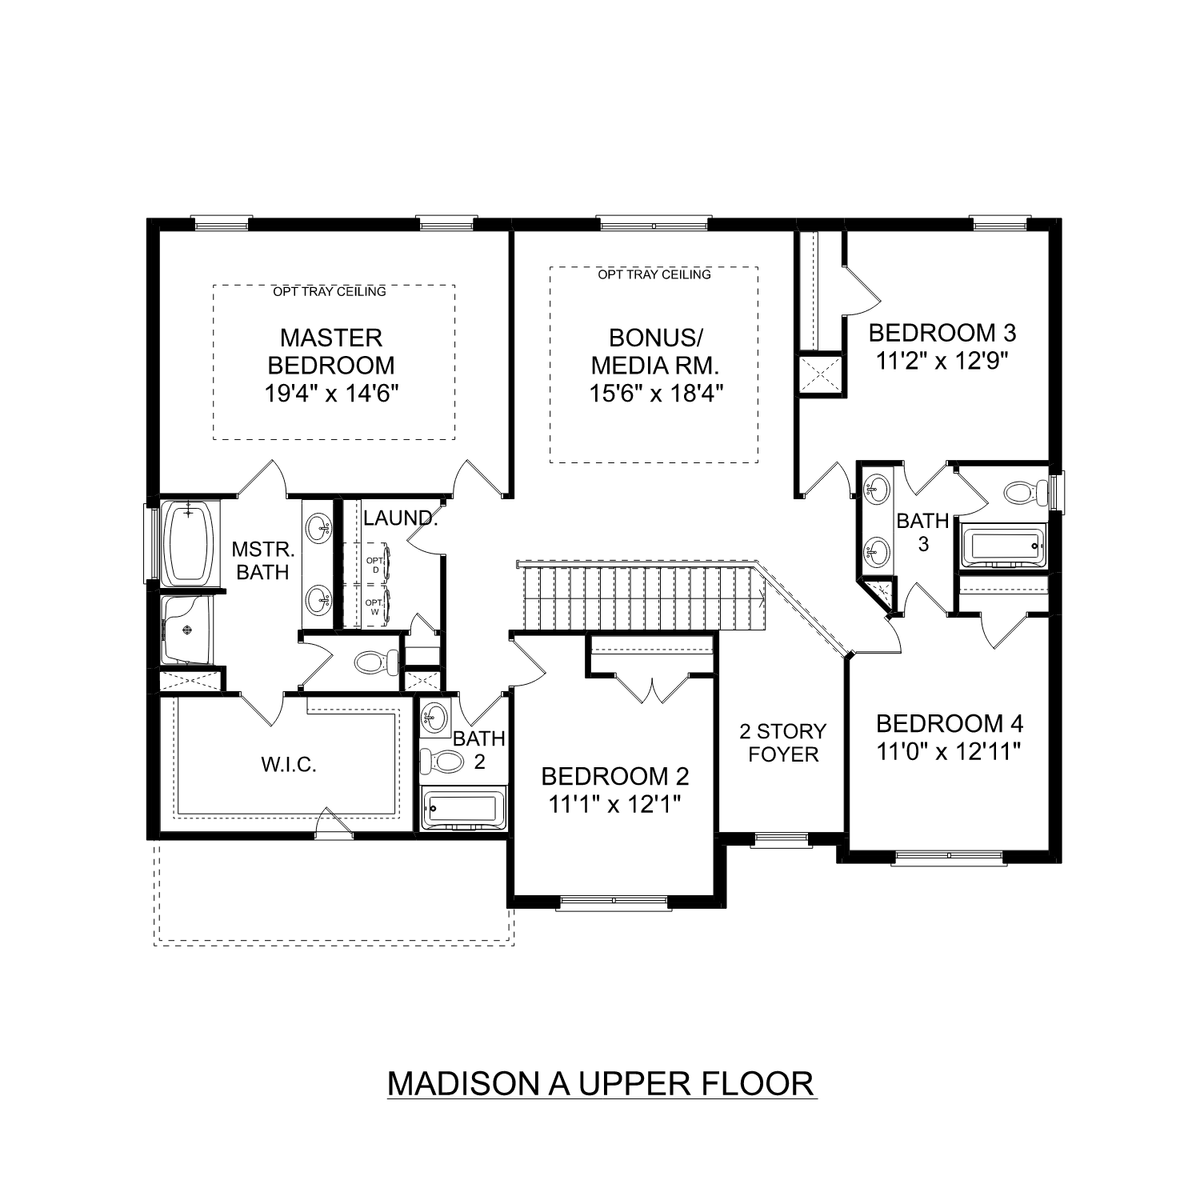 2 - The Madison A floor plan layout for 2107 Brandon Drive in Davidson Homes' North Ridge community.